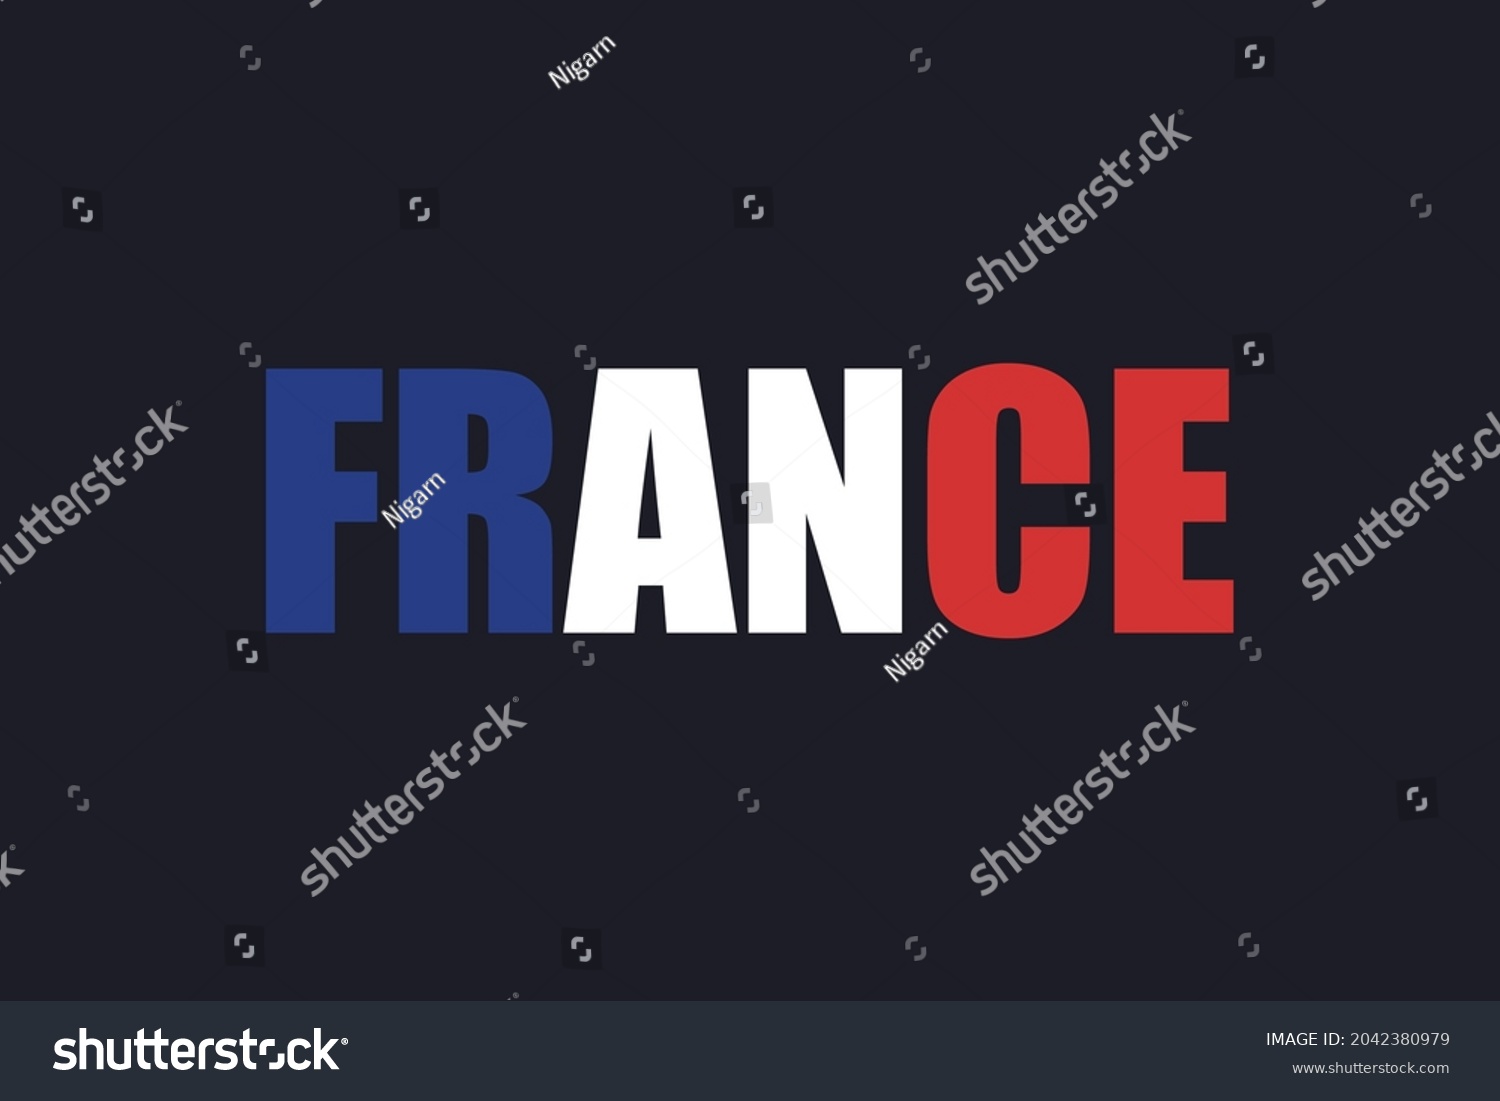 19,017 France word Images, Stock Photos & Vectors | Shutterstock